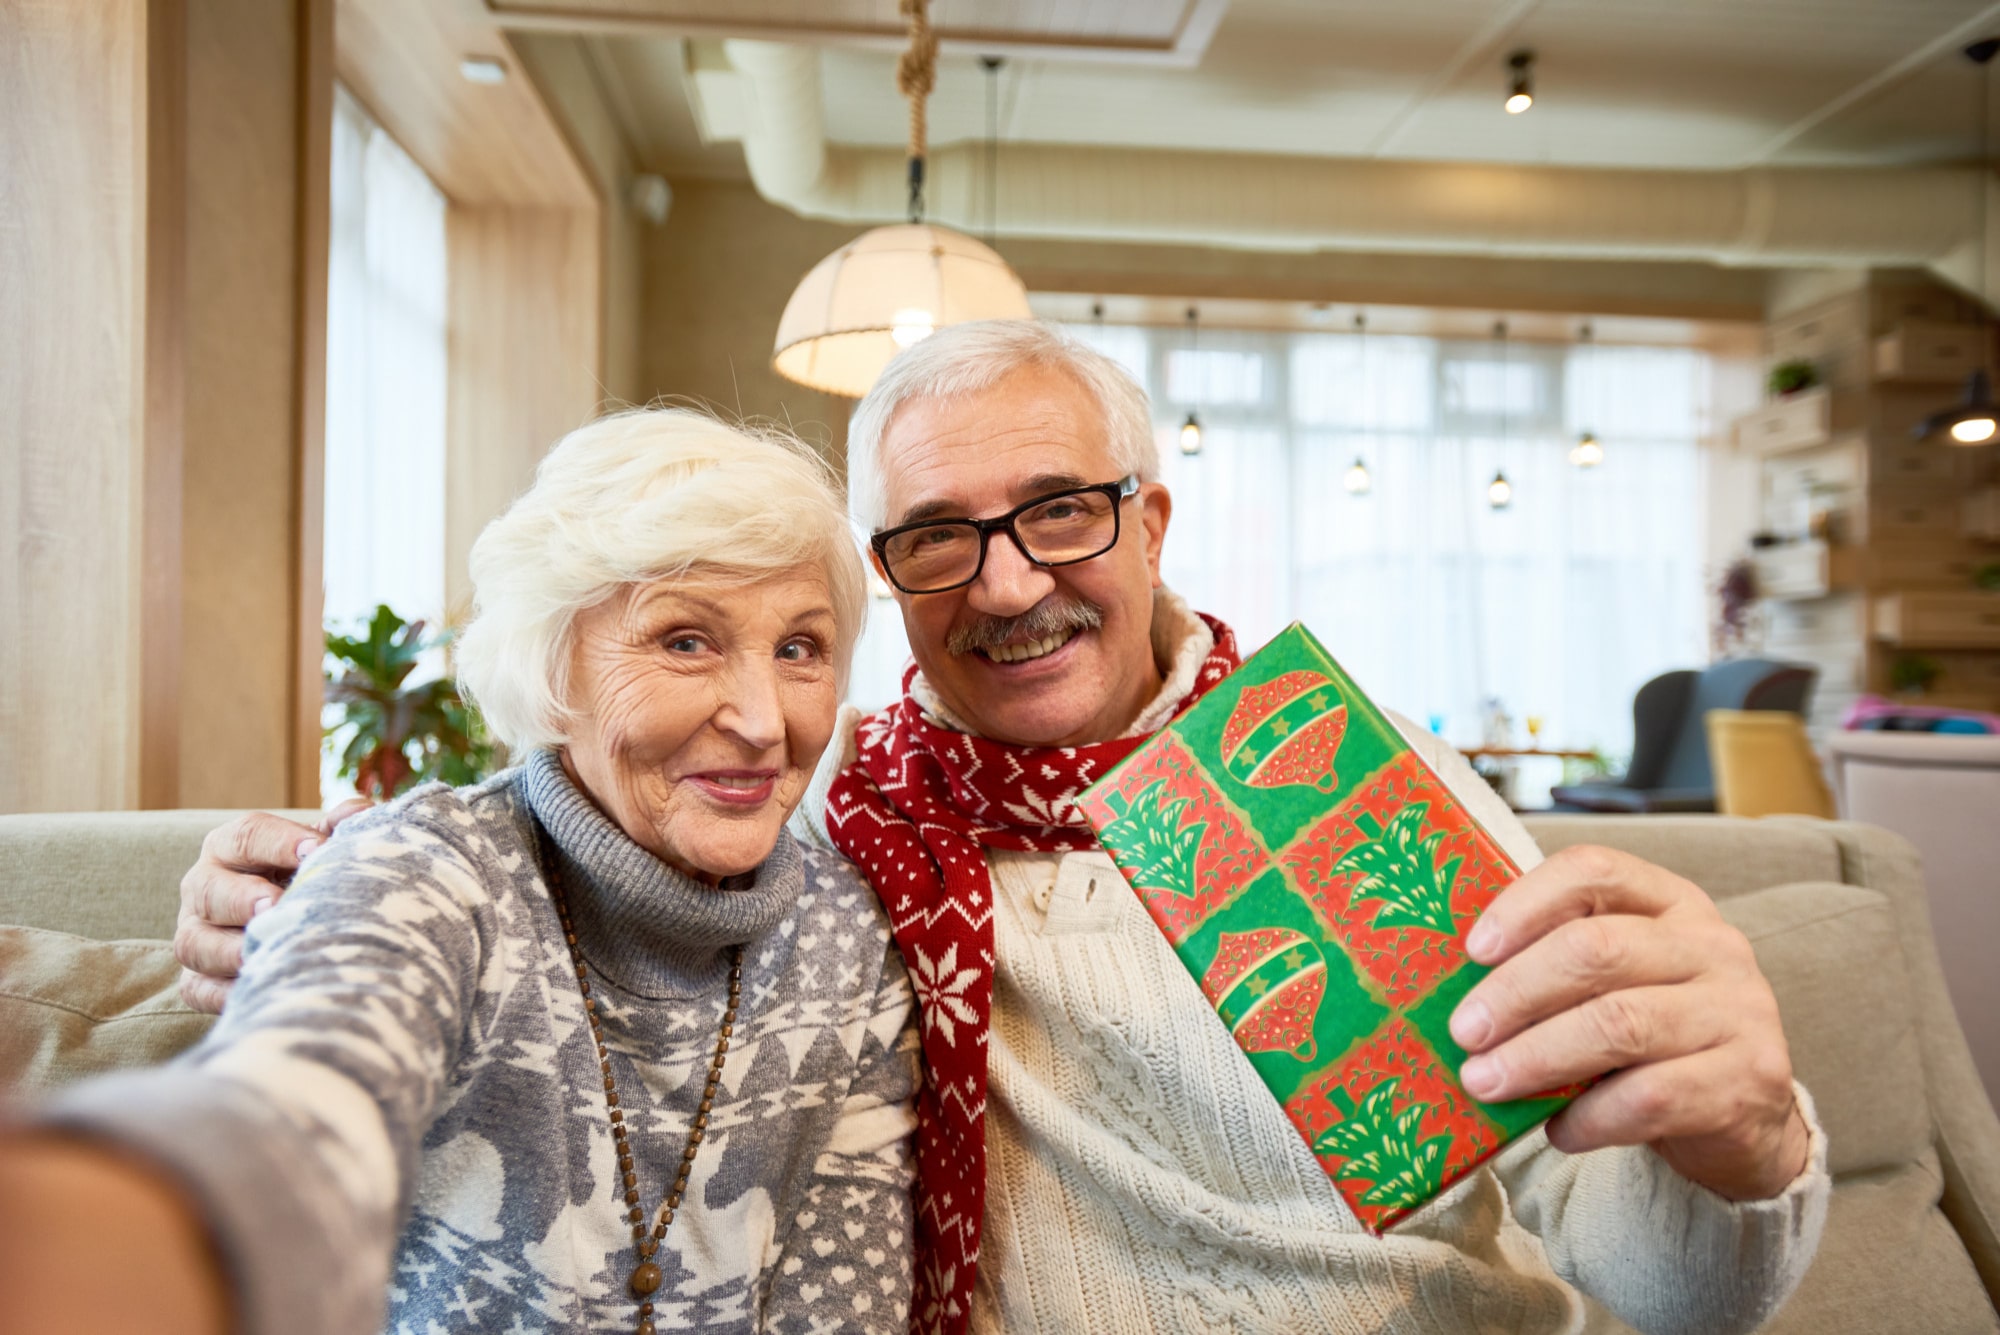 Grandma and Grandpa Approved: 40+ Thoughtful Gift Ideas for Grandparents